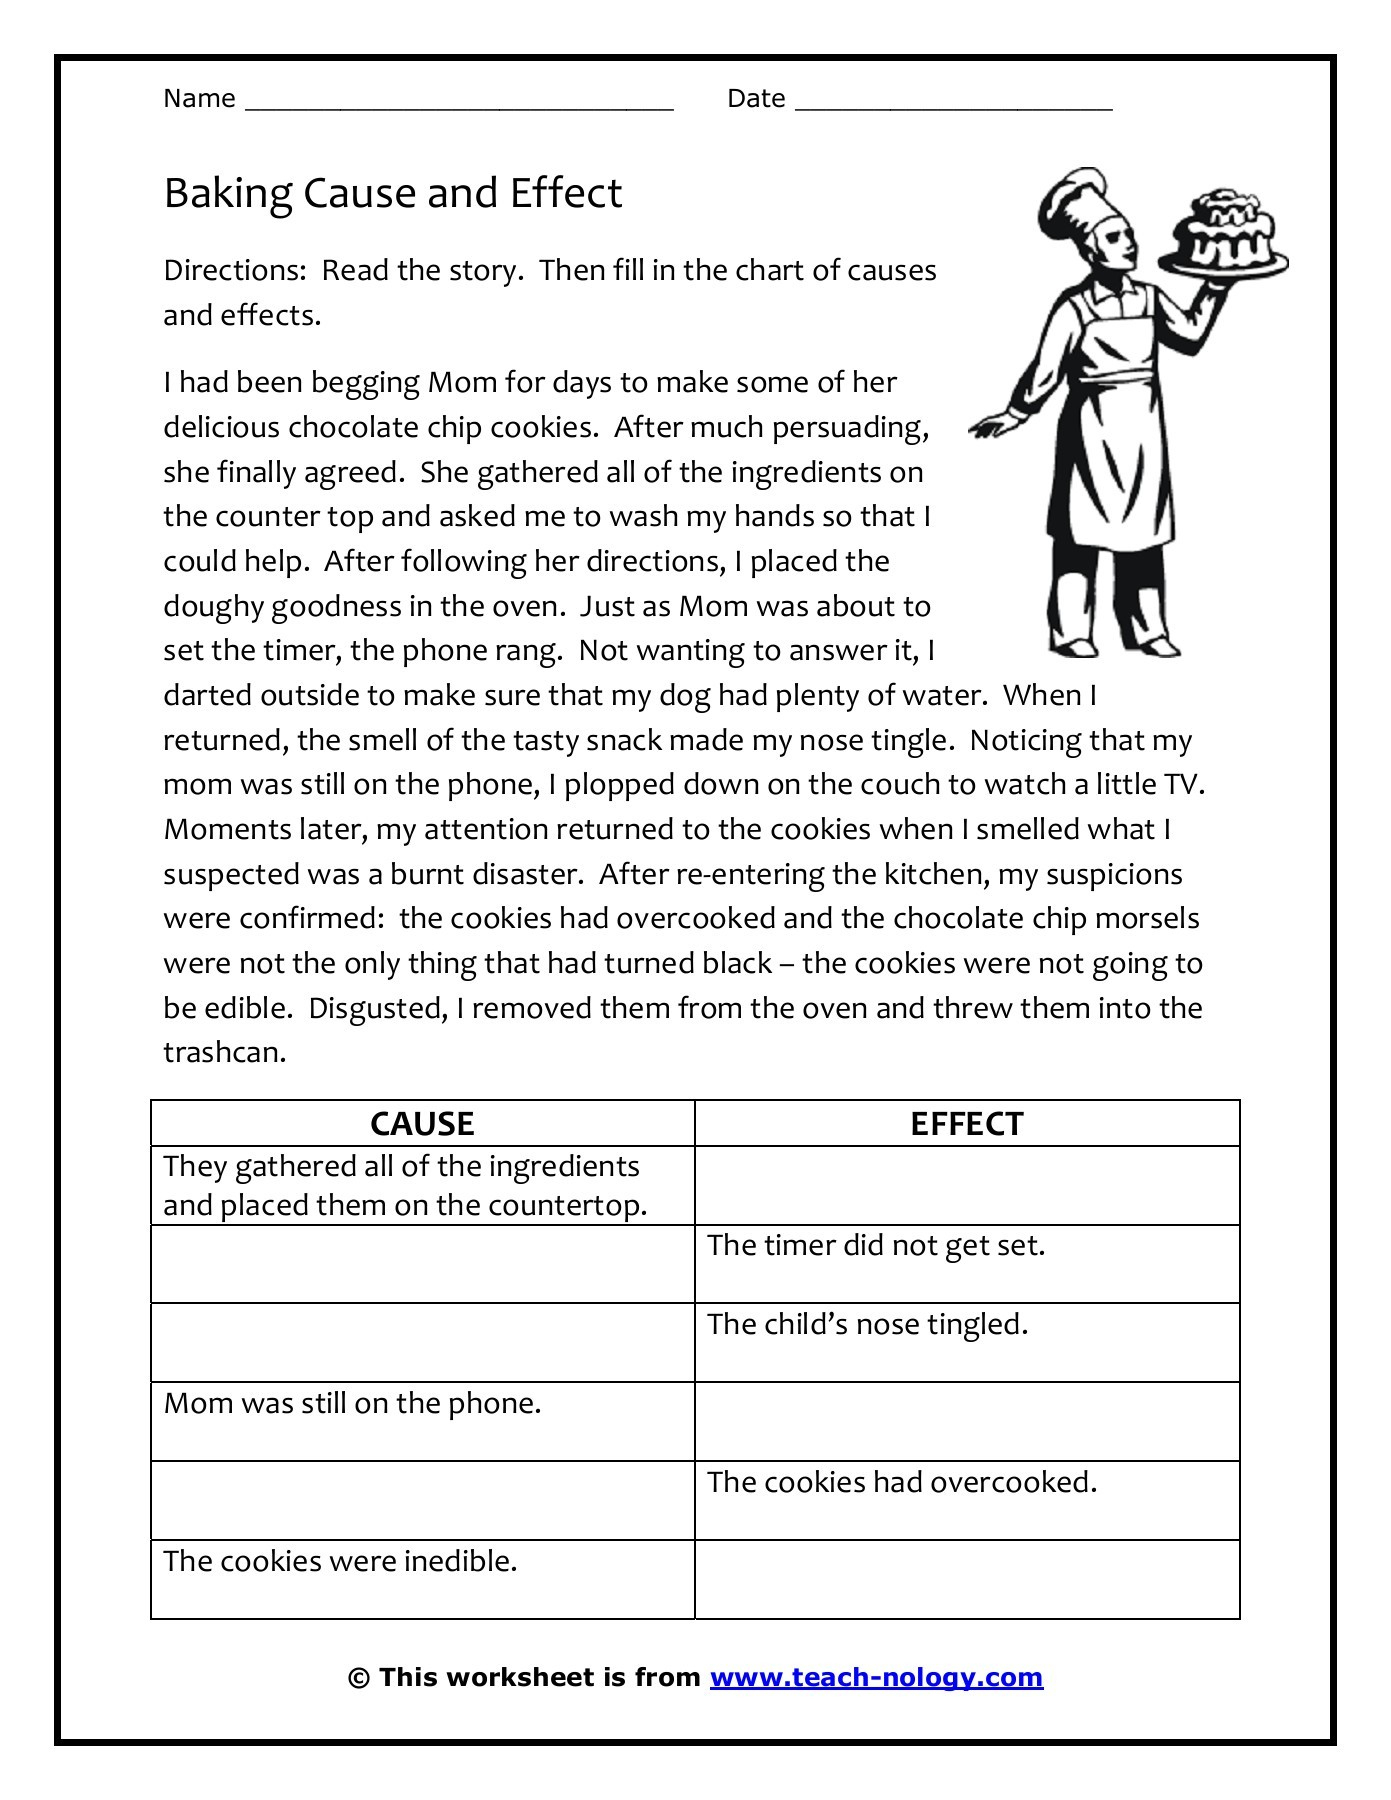 Baking Cause And Effect - Worksheets, Lesson Plans